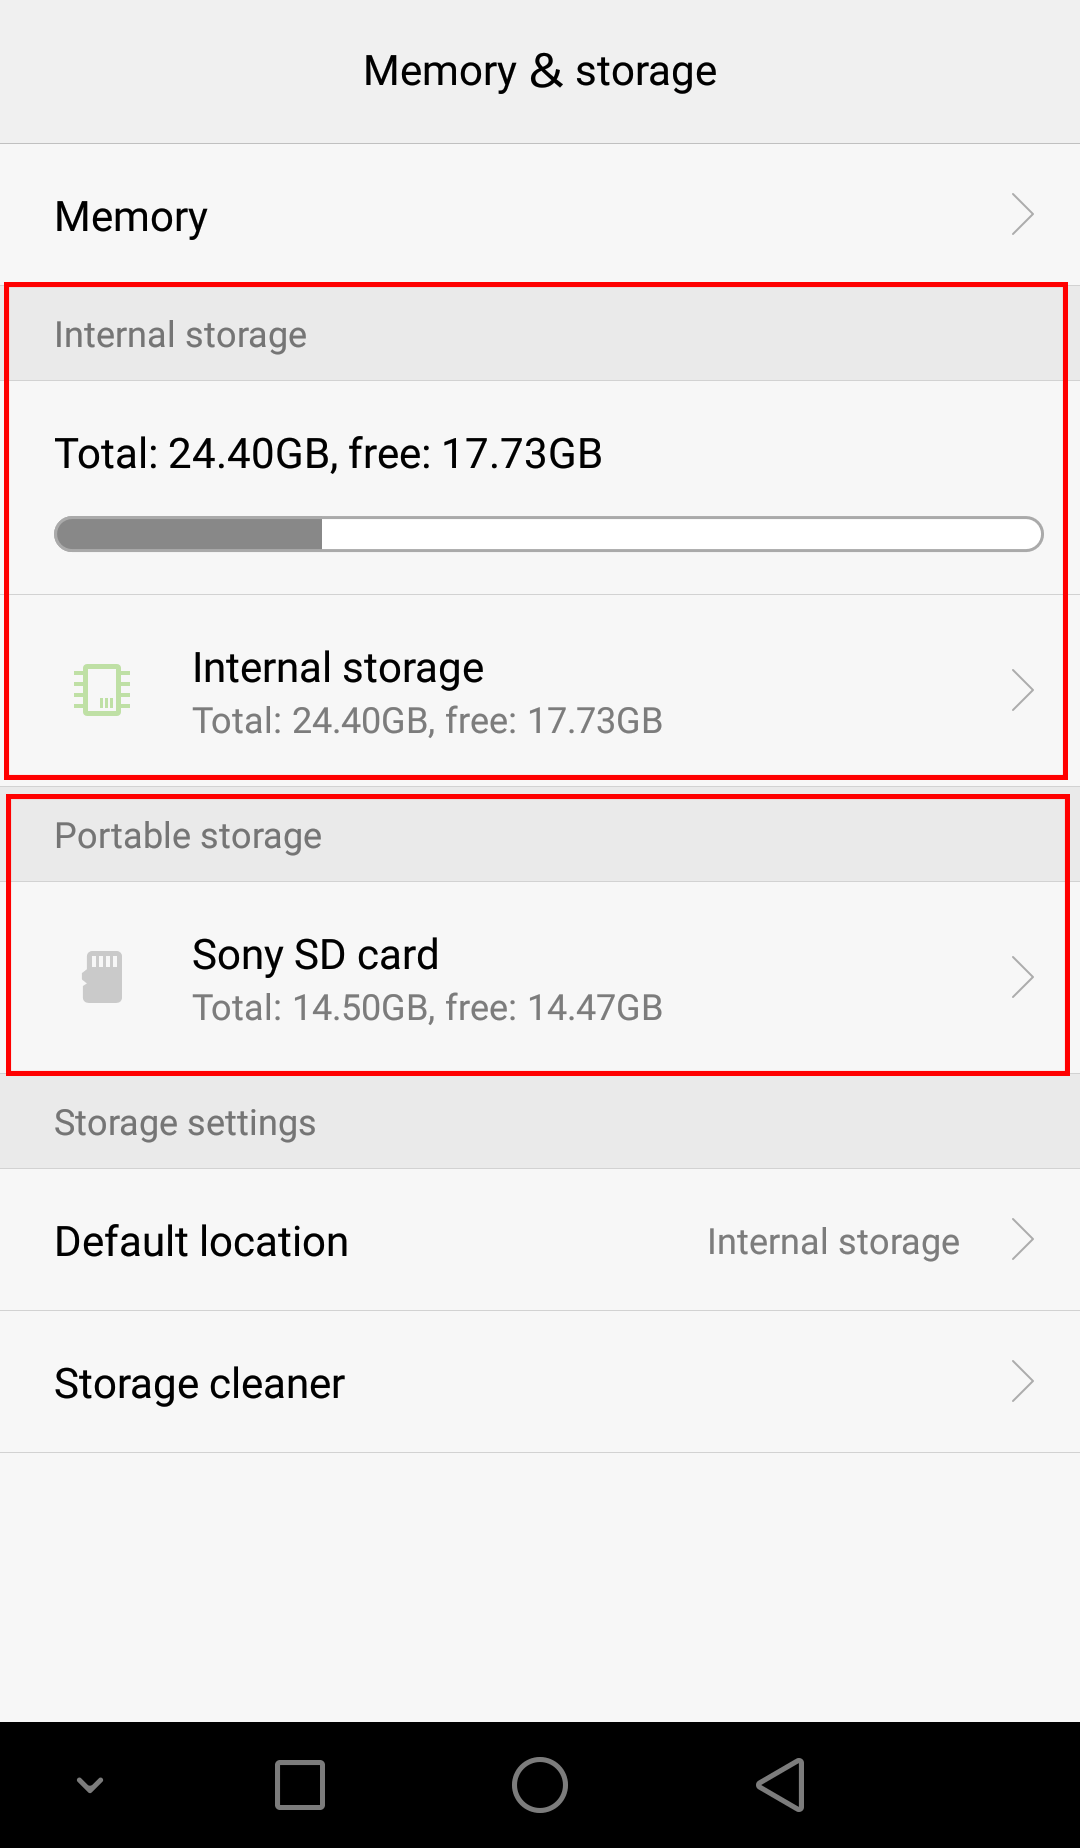 go and see the storage situation in a smartphone